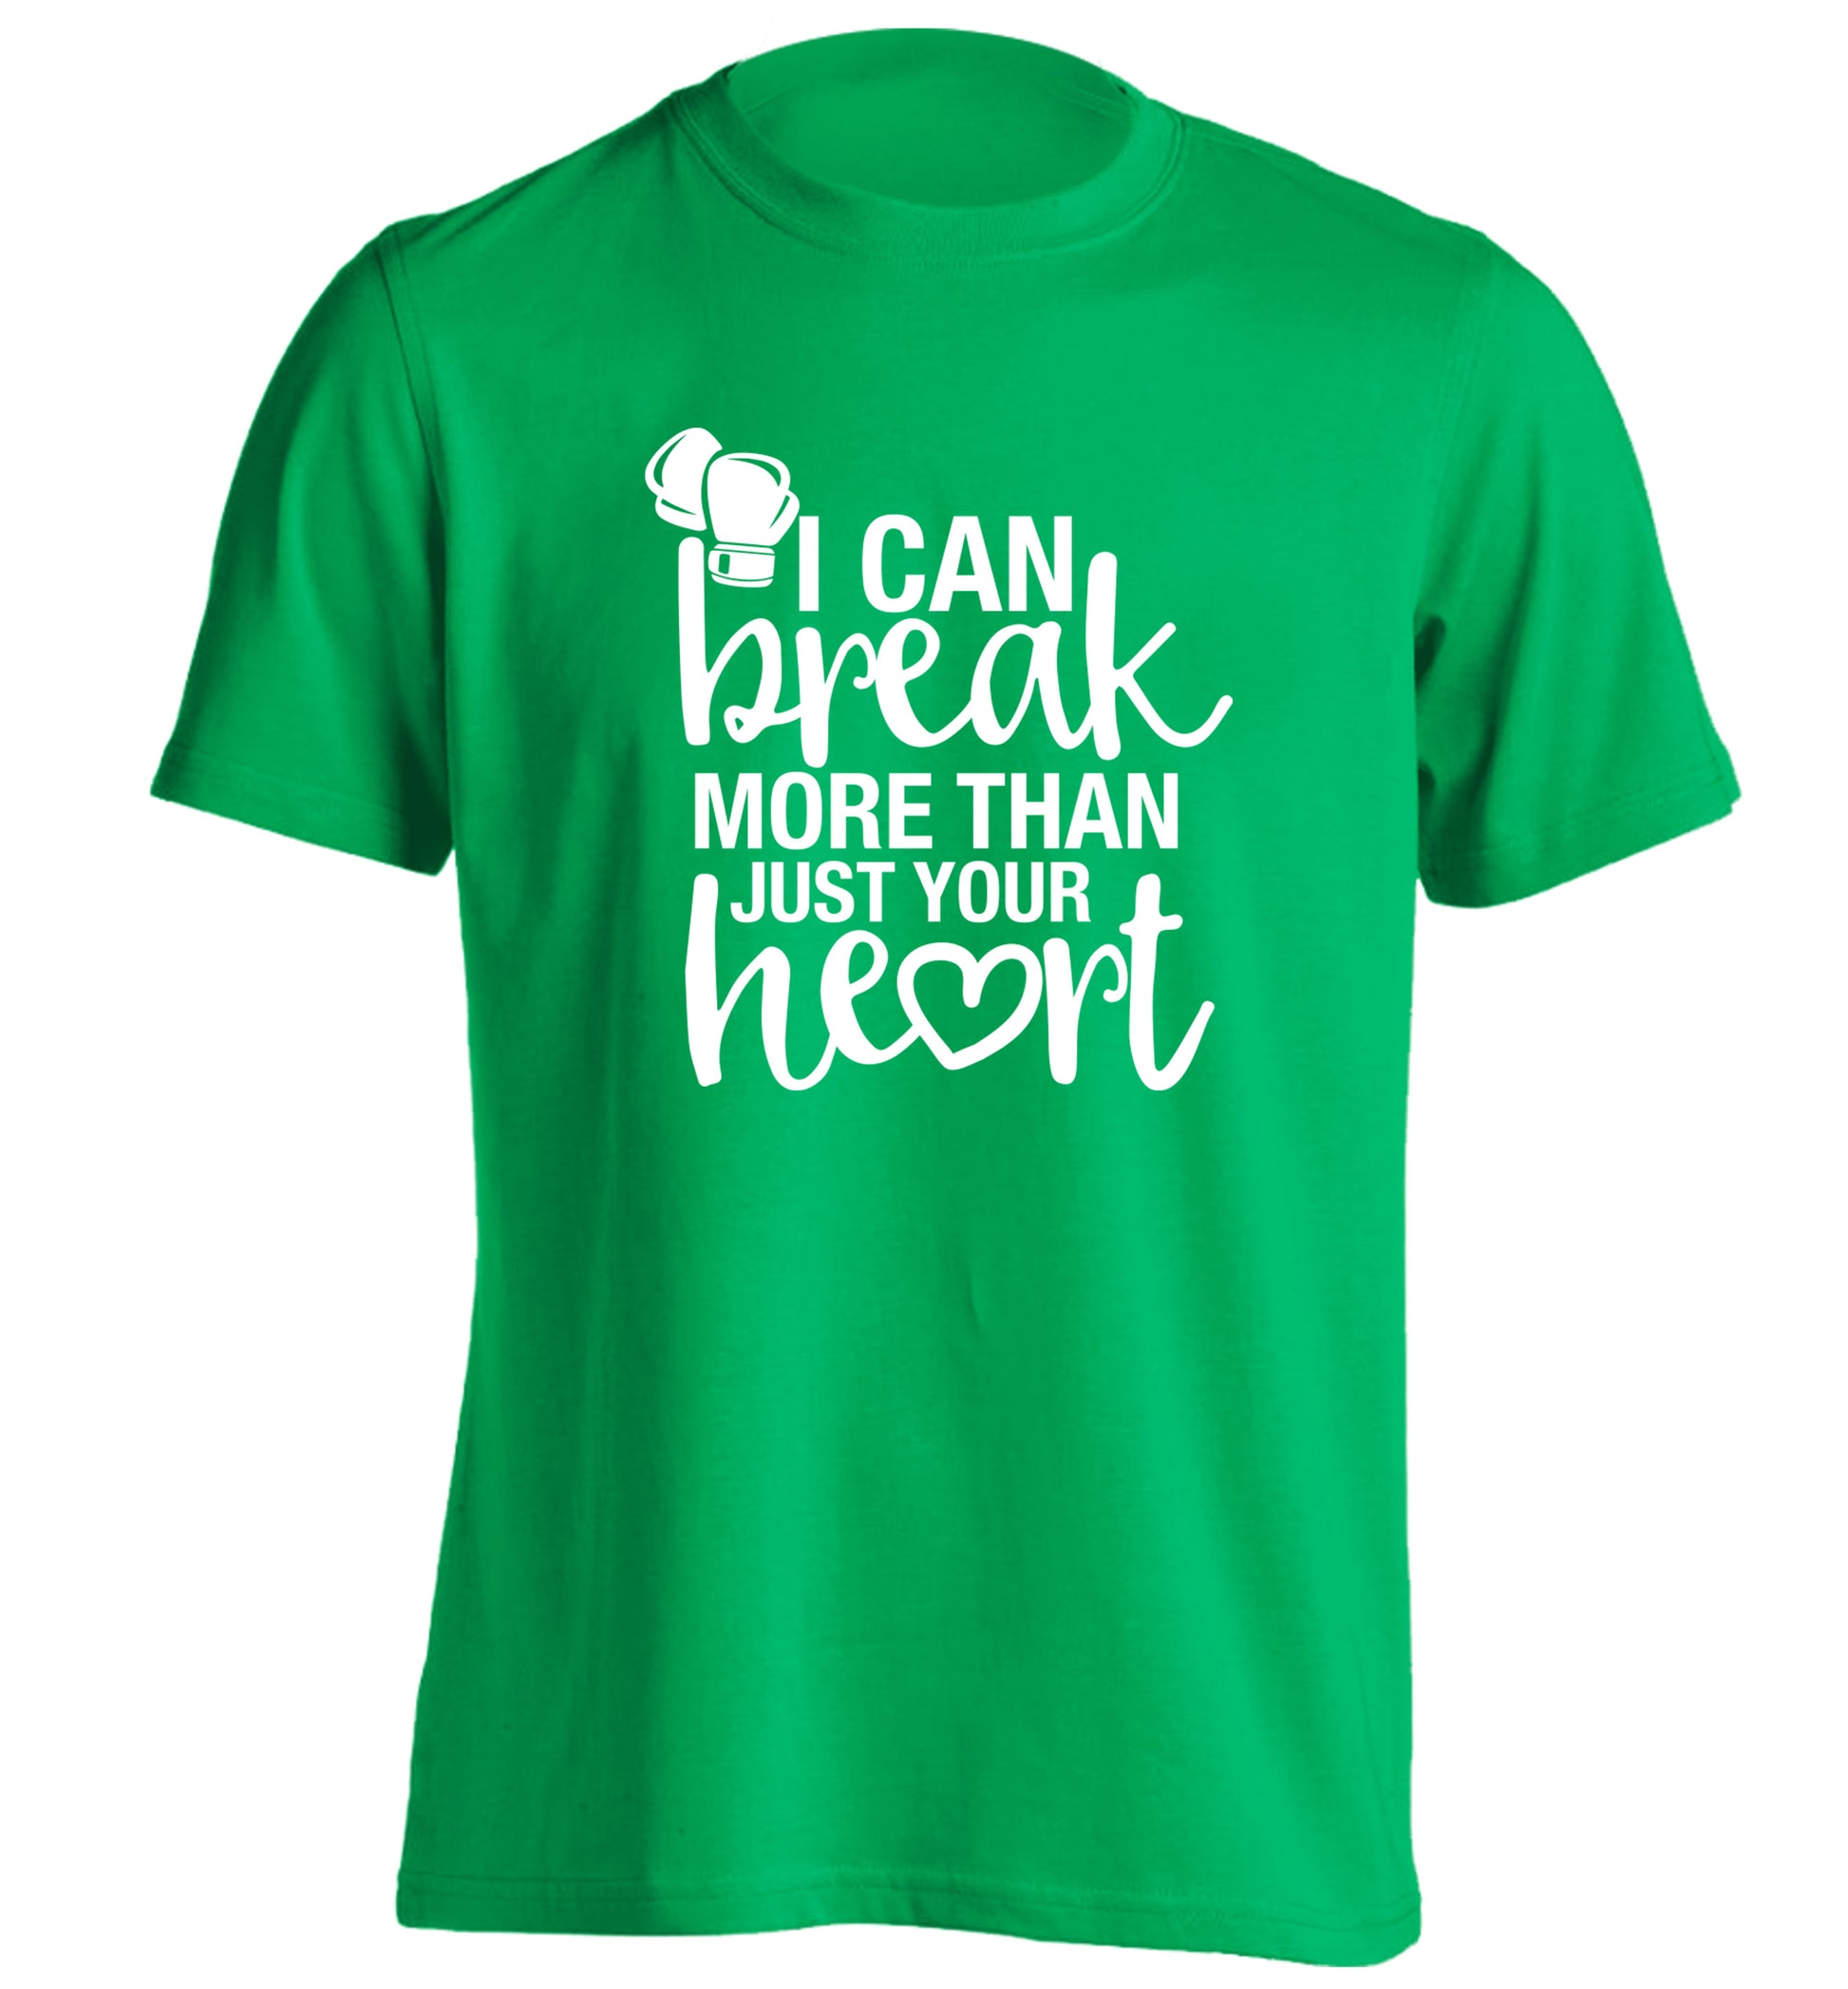 I can break more than just your heart adults unisex green Tshirt 2XL